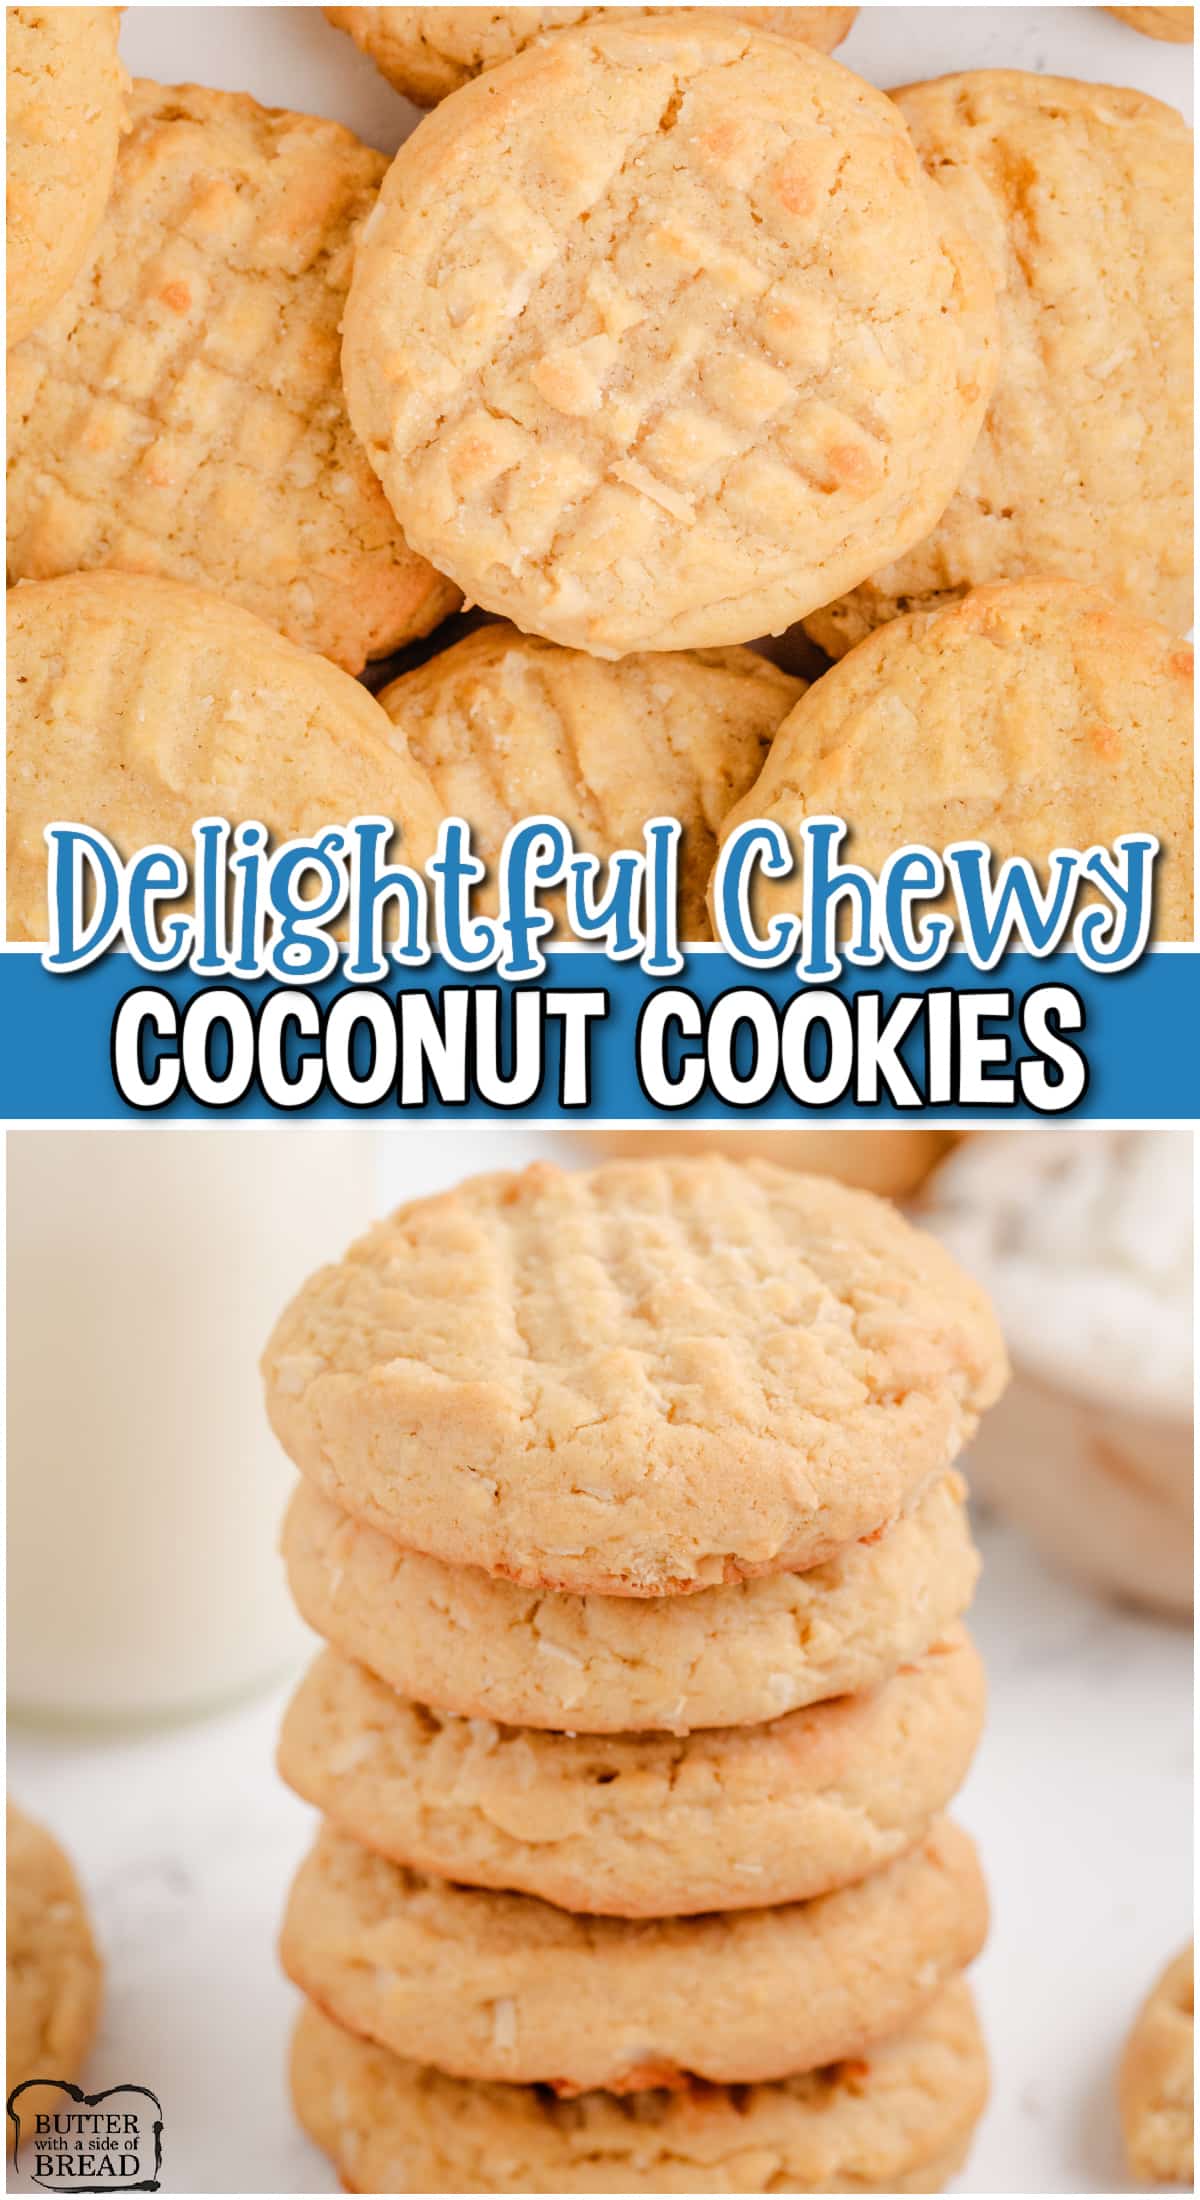 Chewy Coconut Cookies are delightful sugar cookies baked with coconut for fantastic buttery, nutty flavor!